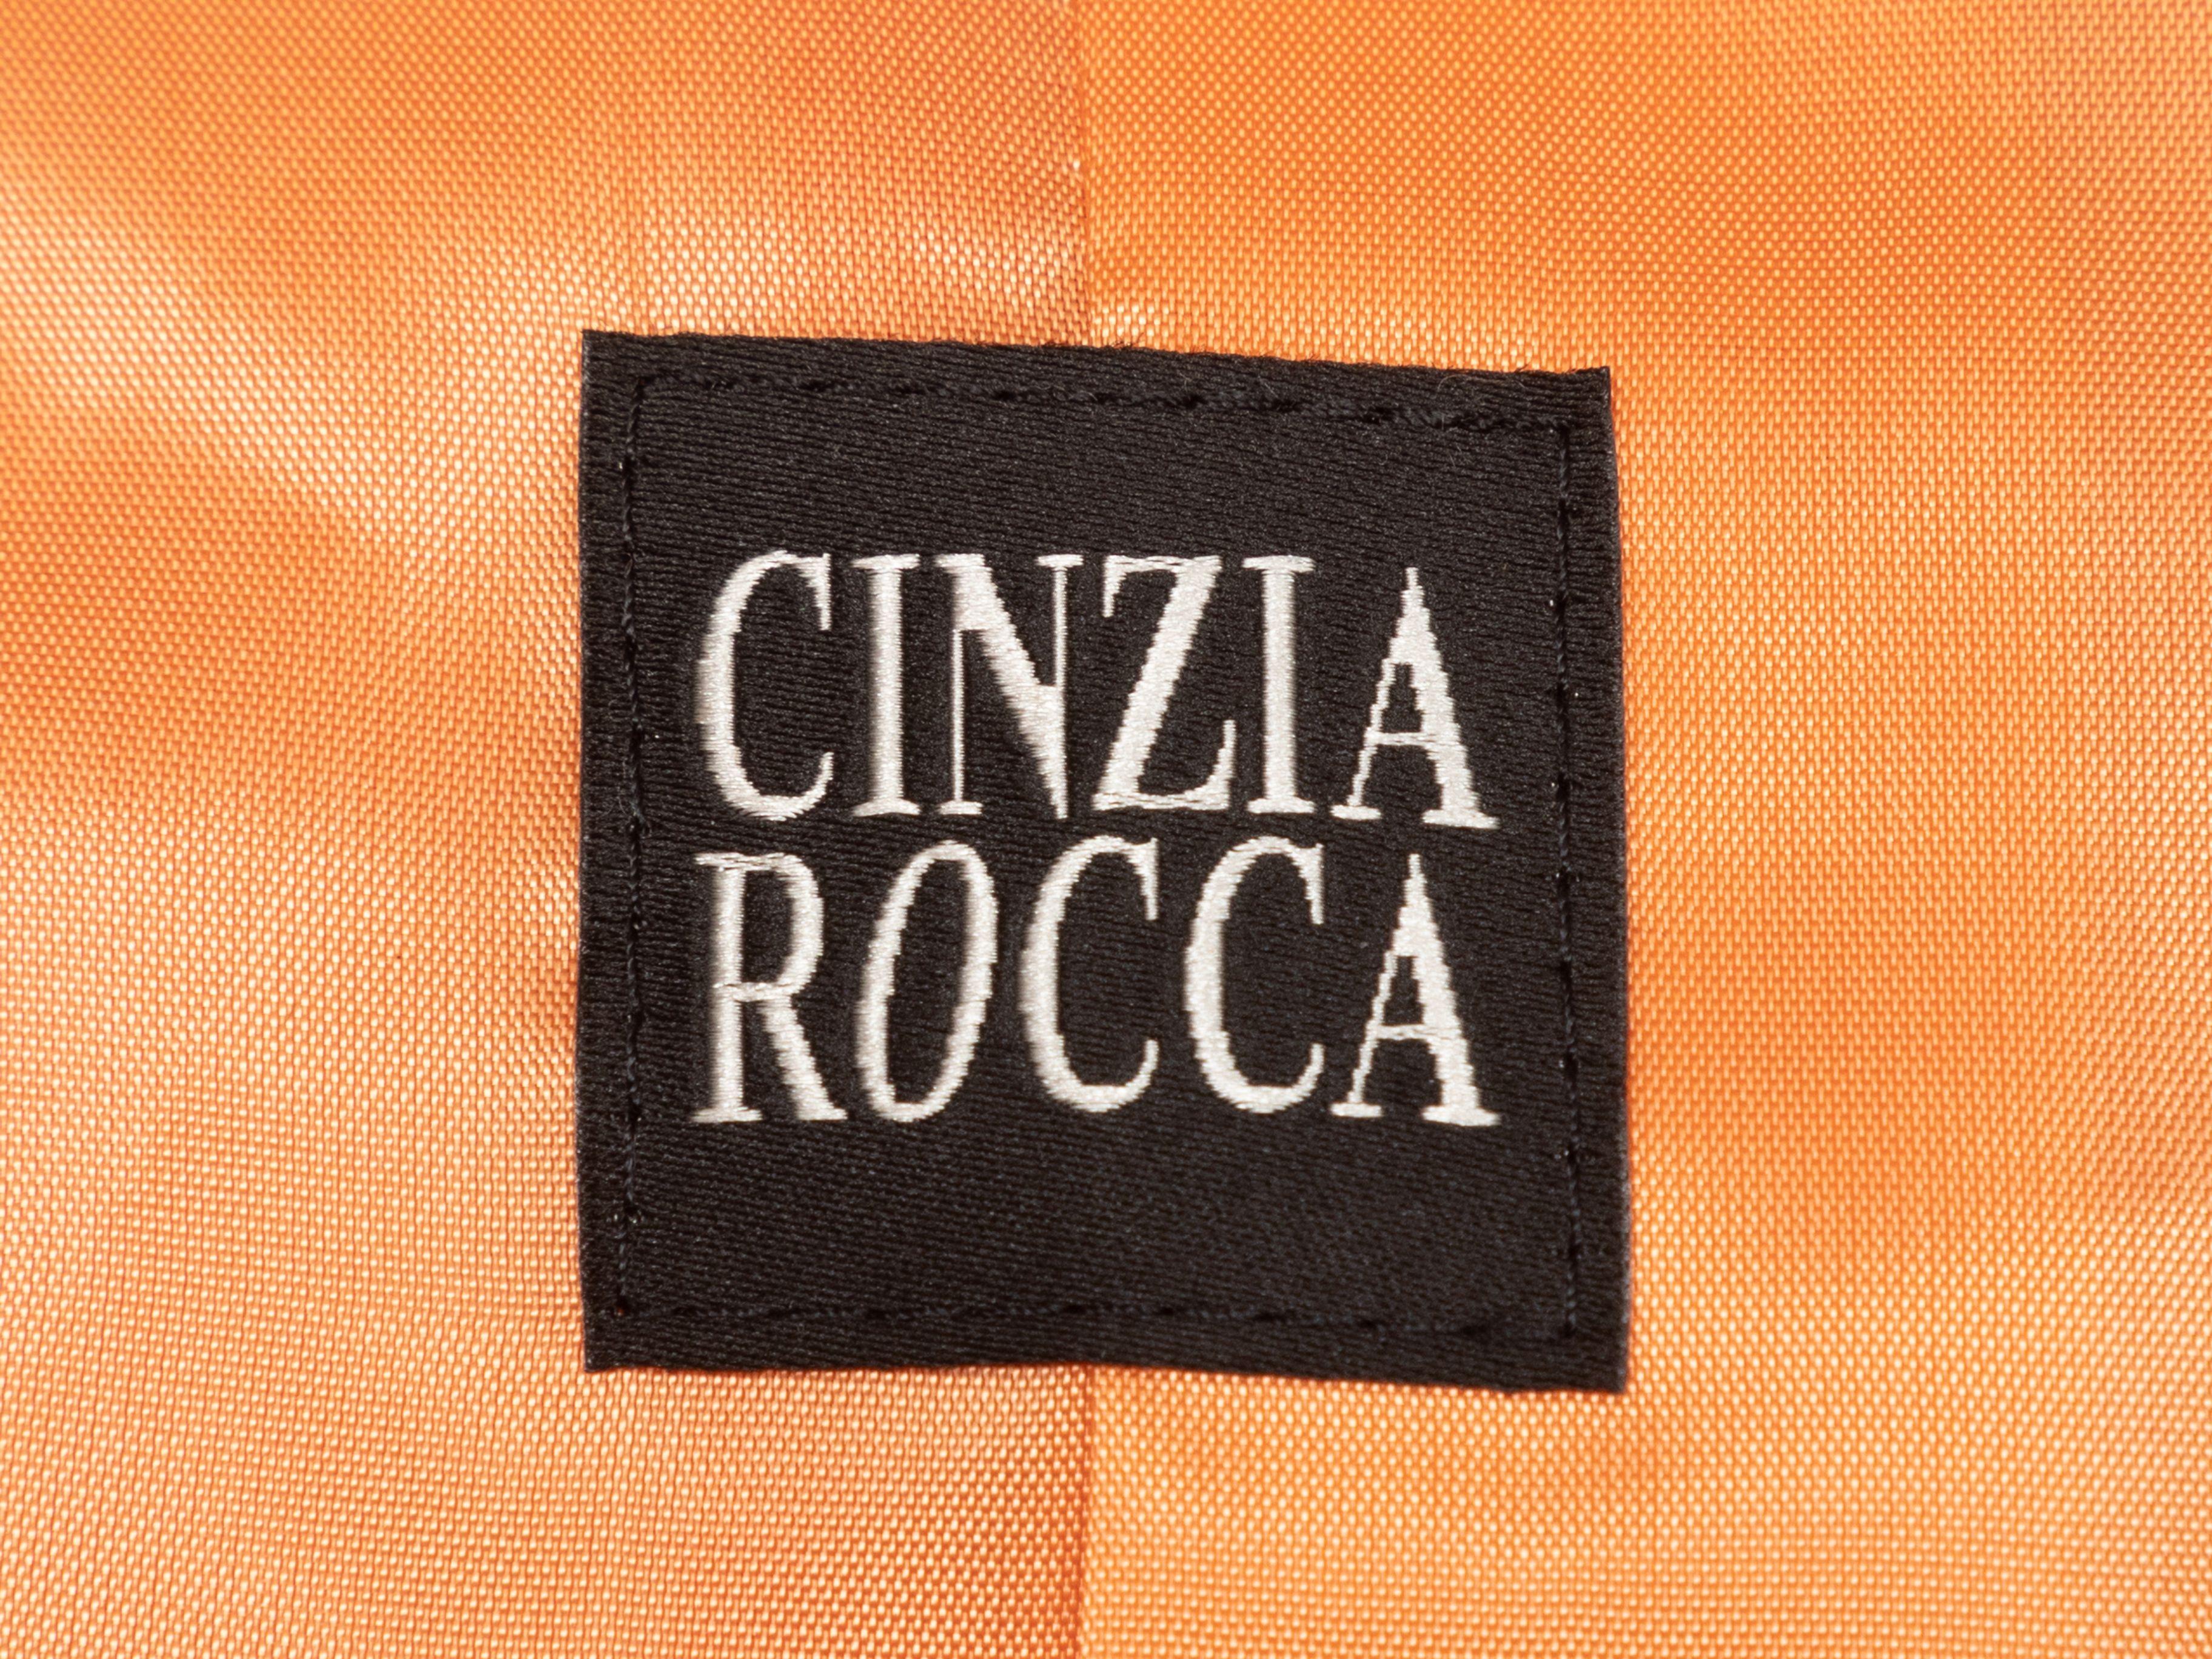 Product Details: Pastel orange virgin wool coat by Cinzia Rocca. Shawl collar. Dual hip pockets. Single button closure at front. Designer size 42. 40